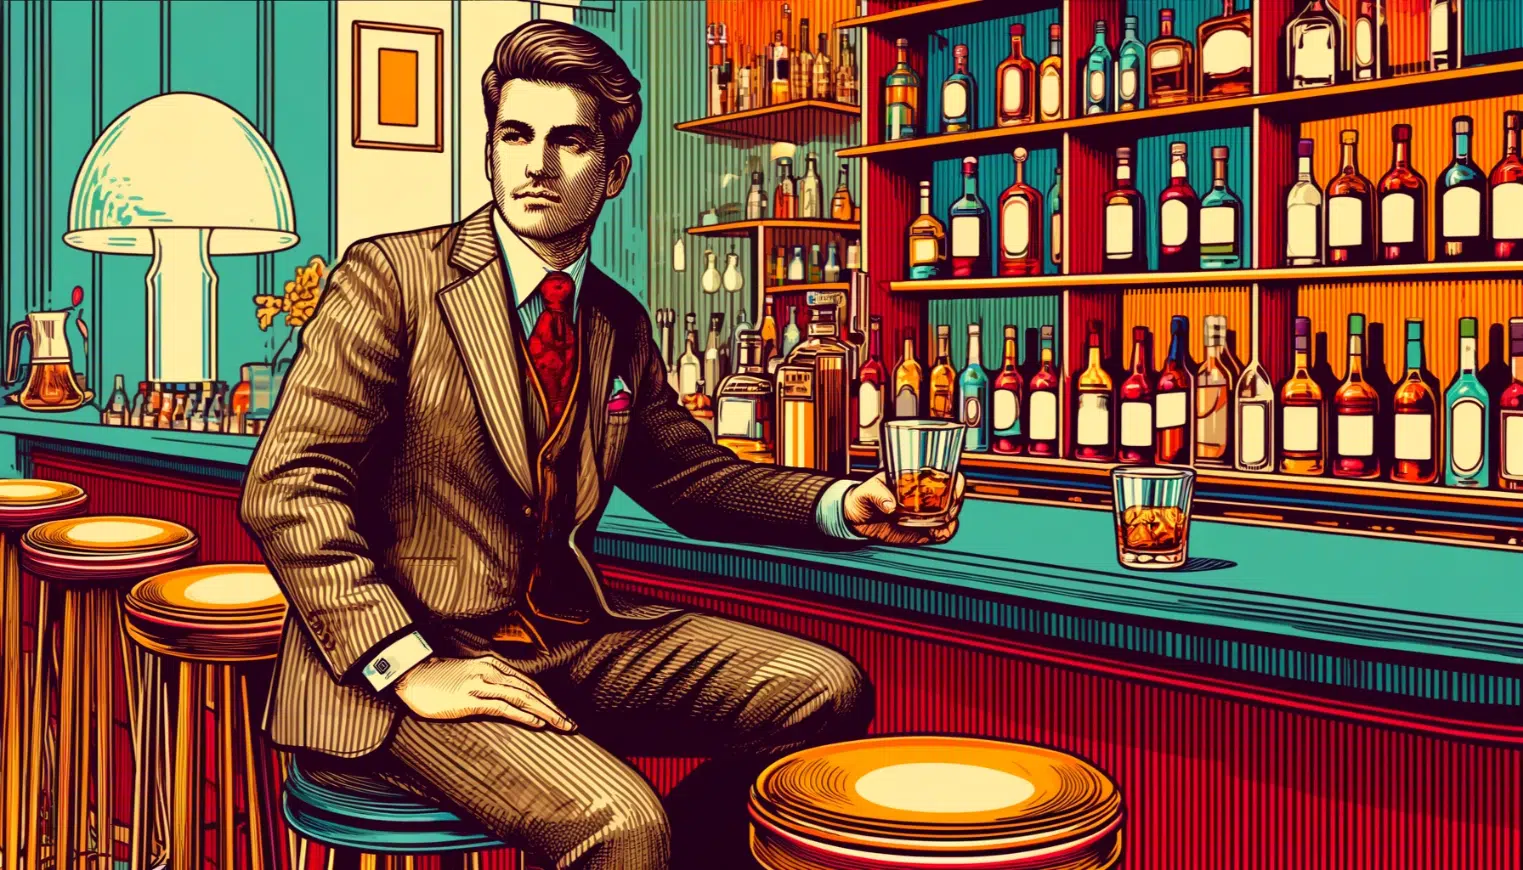 Man sitting at retro style bar with whiskey.